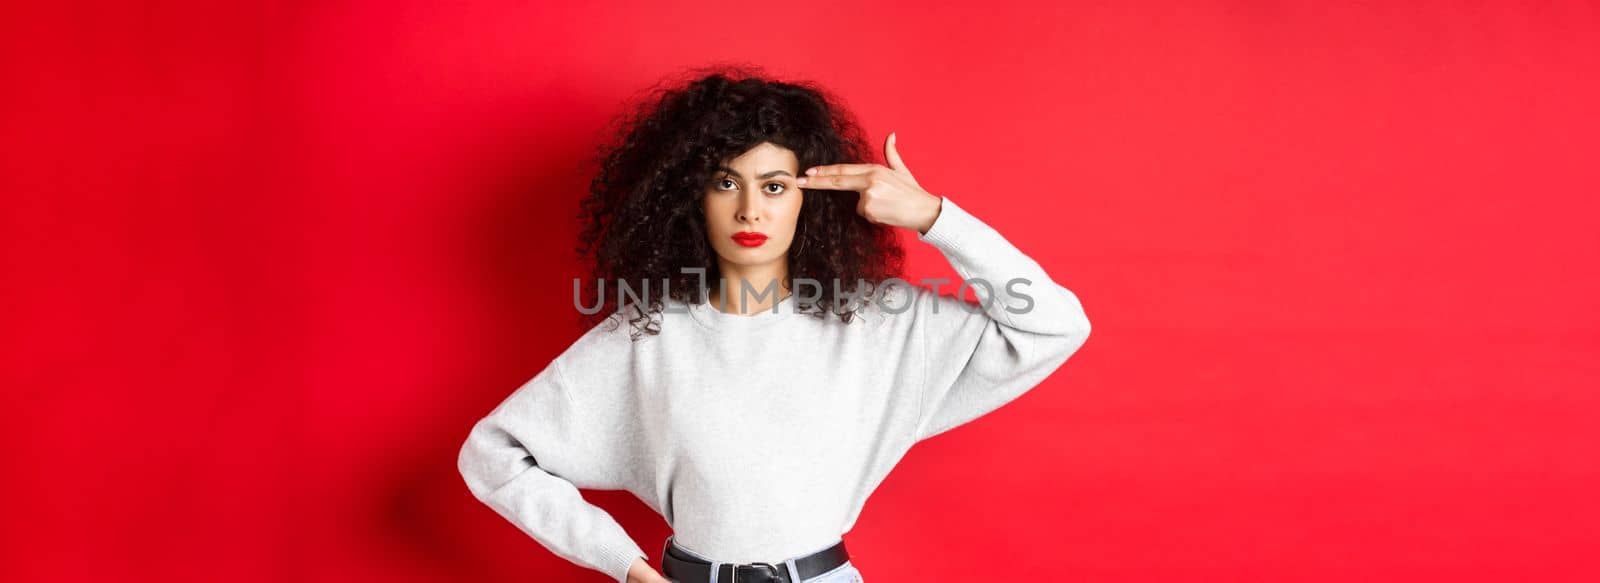 Annoyed caucasian woman with curly hair, showing hand gun sign on head, blow her mind off, standing bothered against red background.